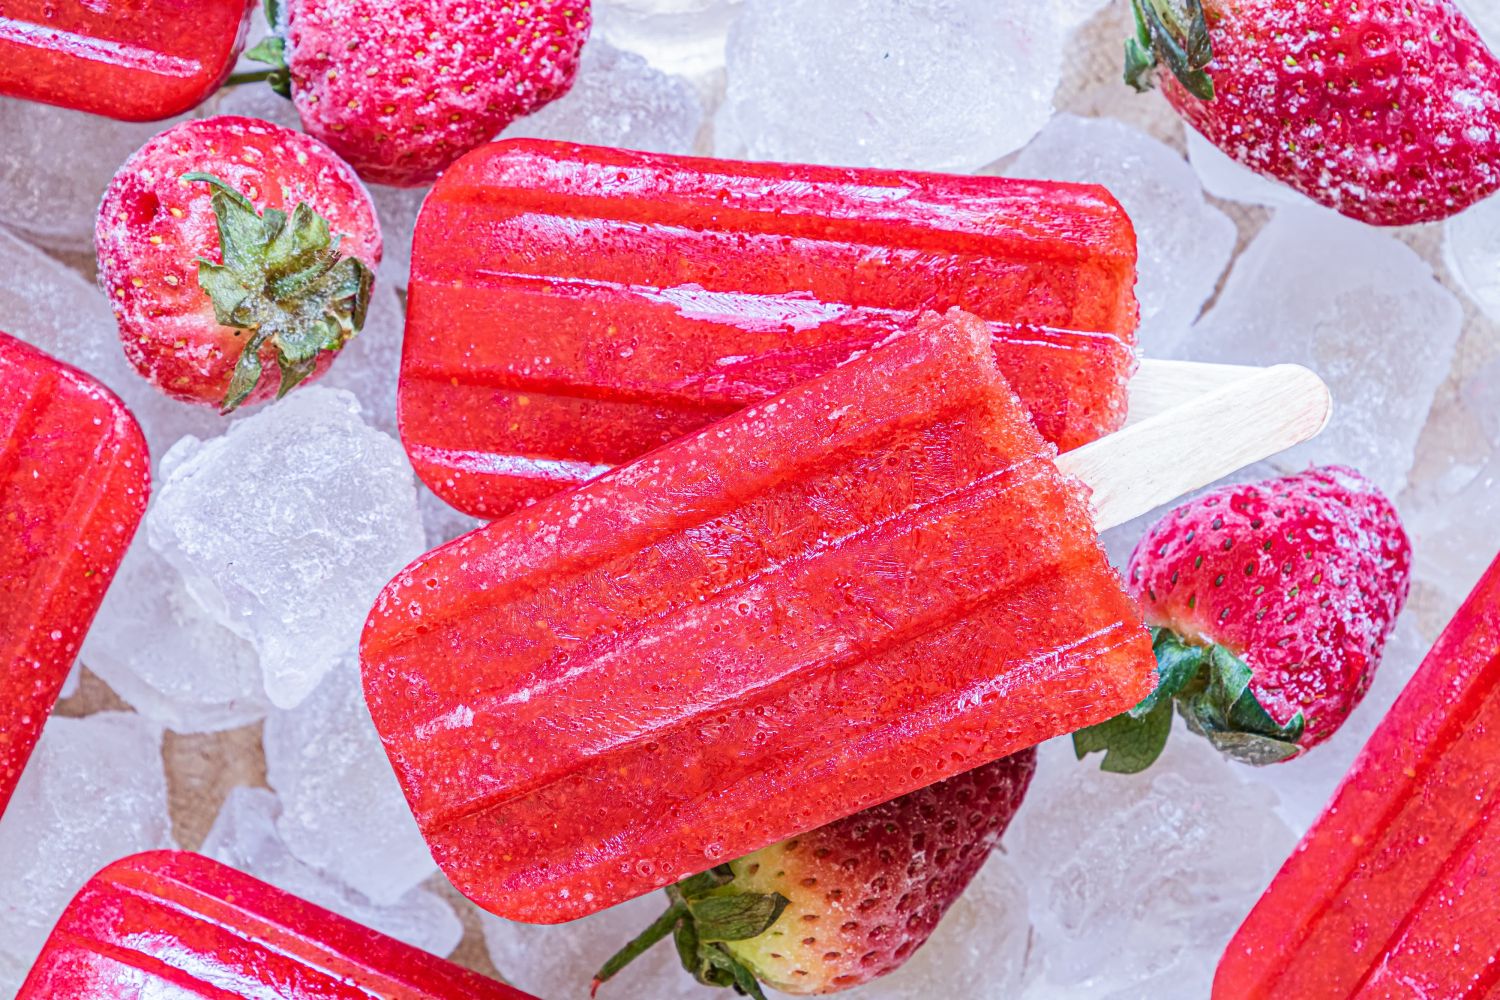 Strawberry popsicles made with fresh strawberries and honey served on a plate with ice.